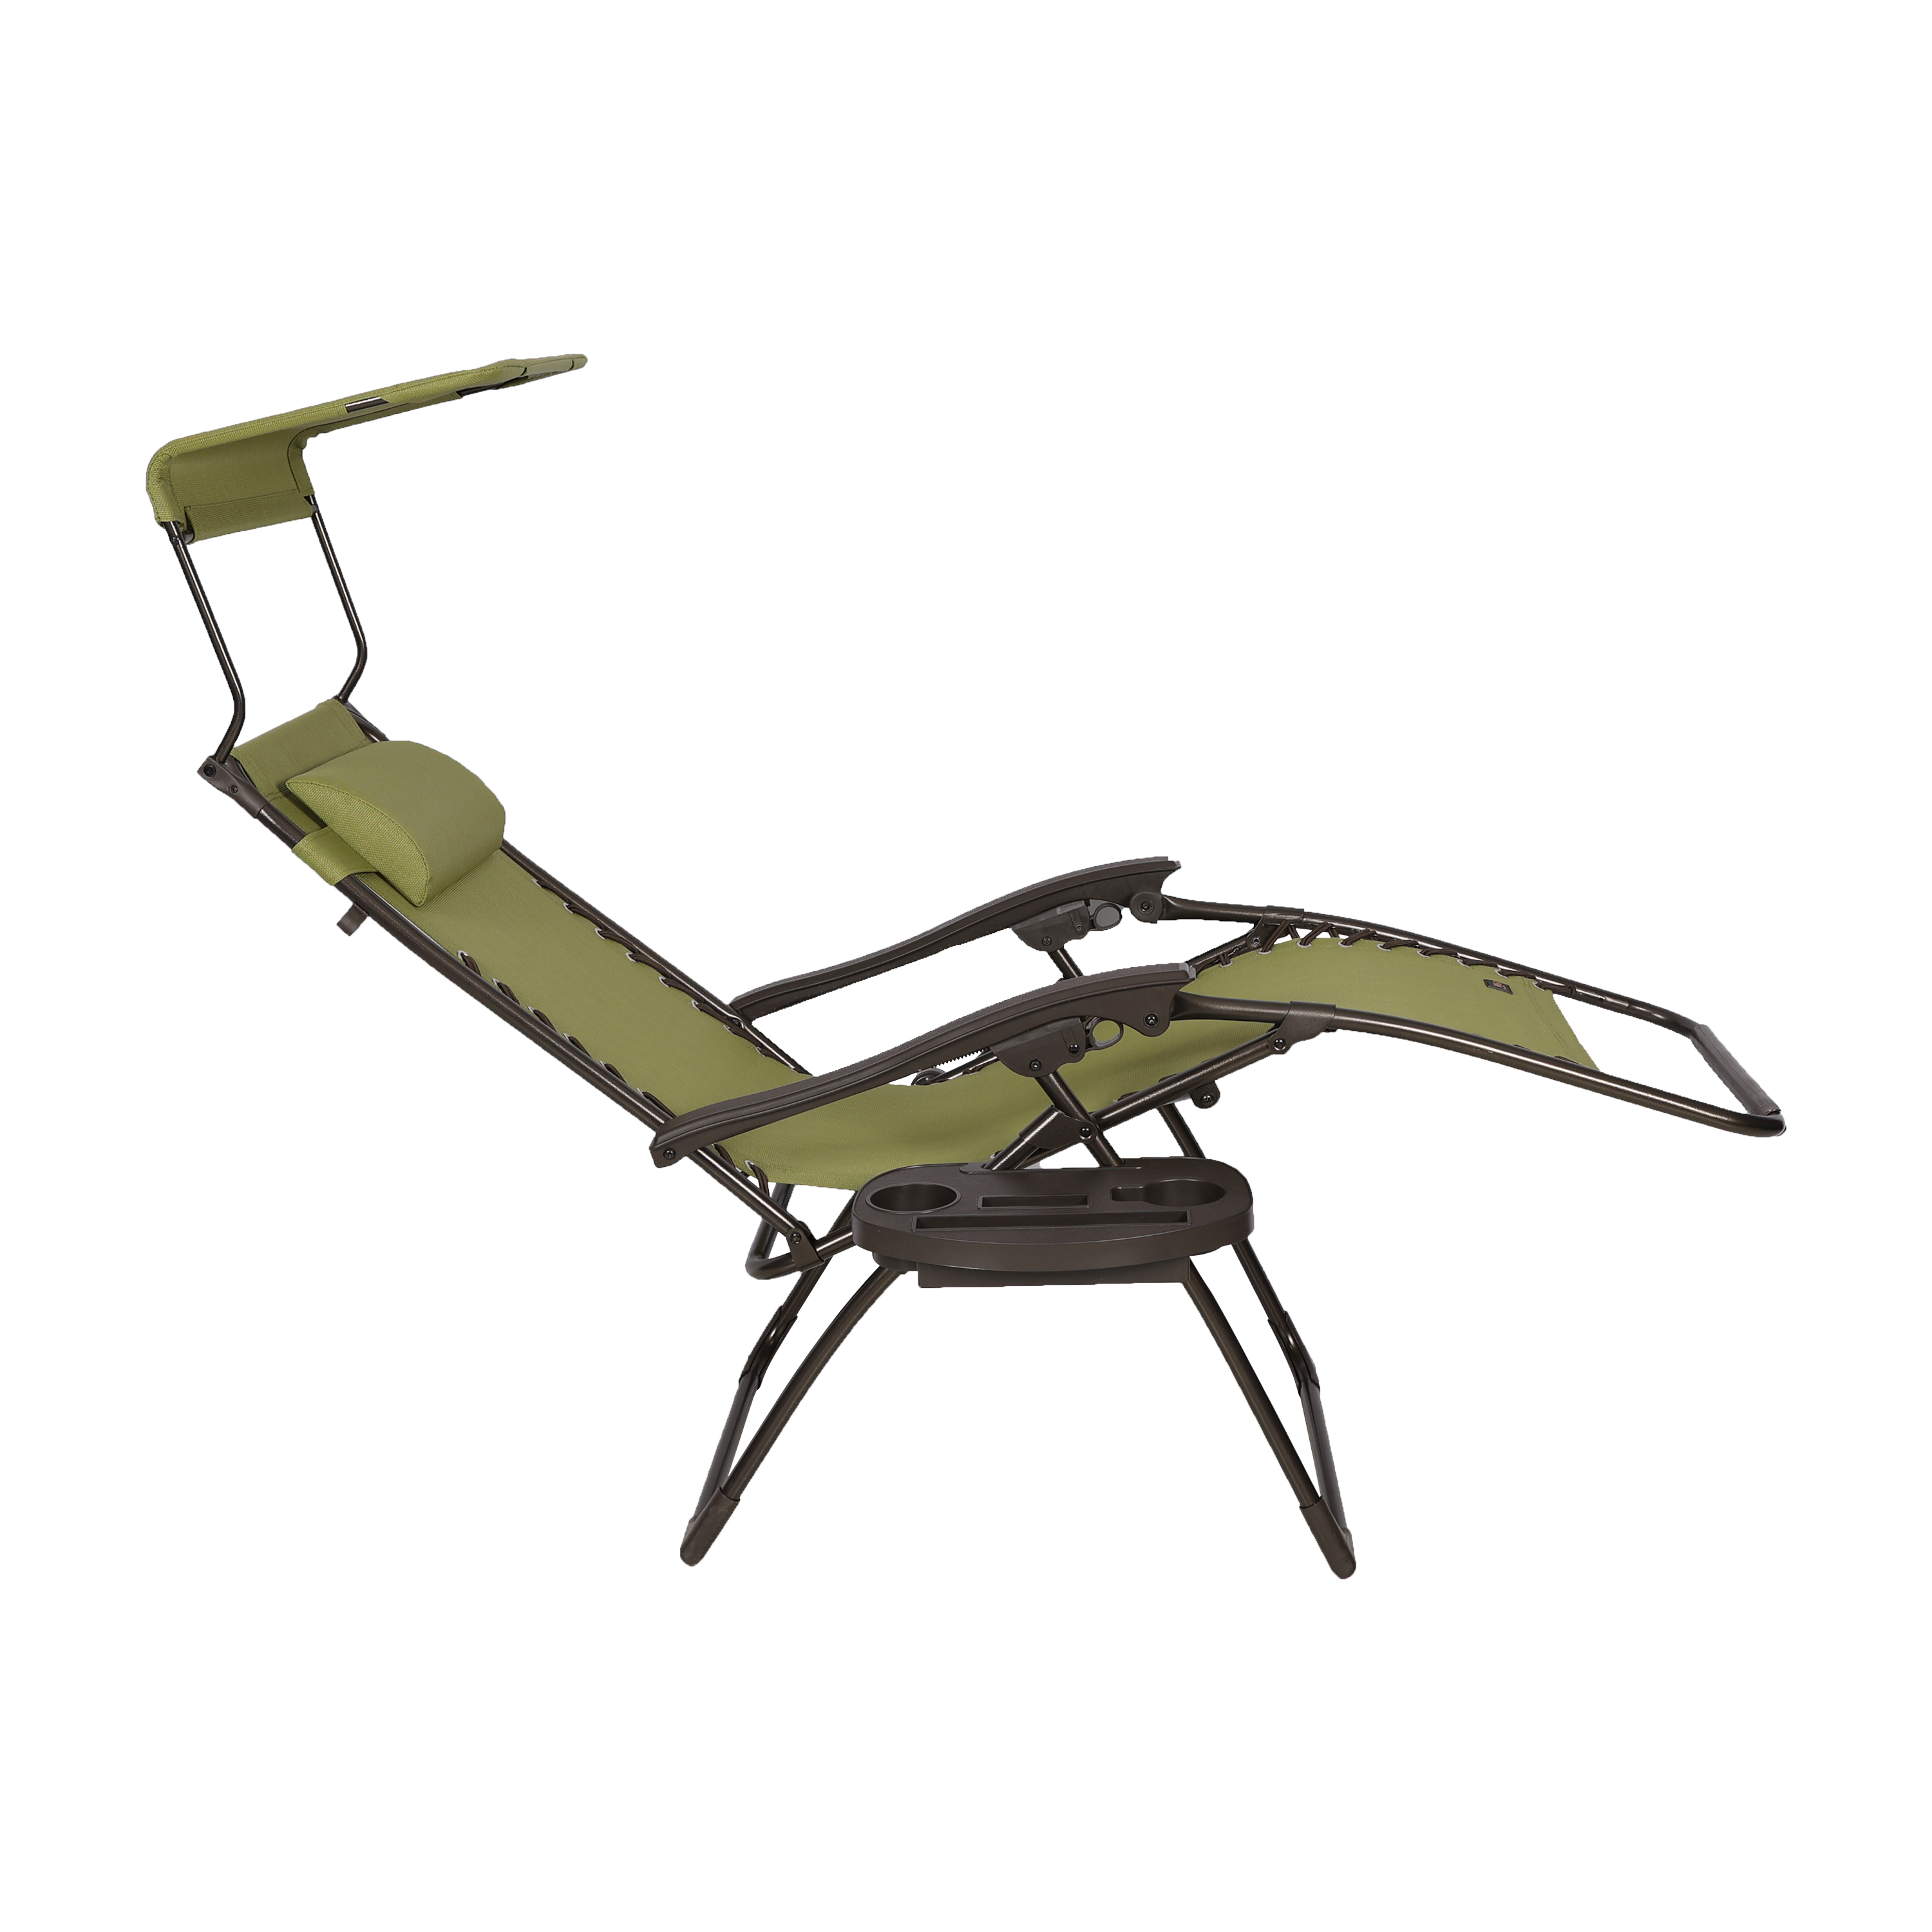 Bliss Hammocks 26" Wide Base Model Zero Gravity Chair w/ Canopy, Pillow, & Drink Tray Folding Outdoor Lawn, Deck, Patio Adjustable Lounge Chair, 300lbs. Weather and Rust Resistant, Sage Green - image 3 of 4